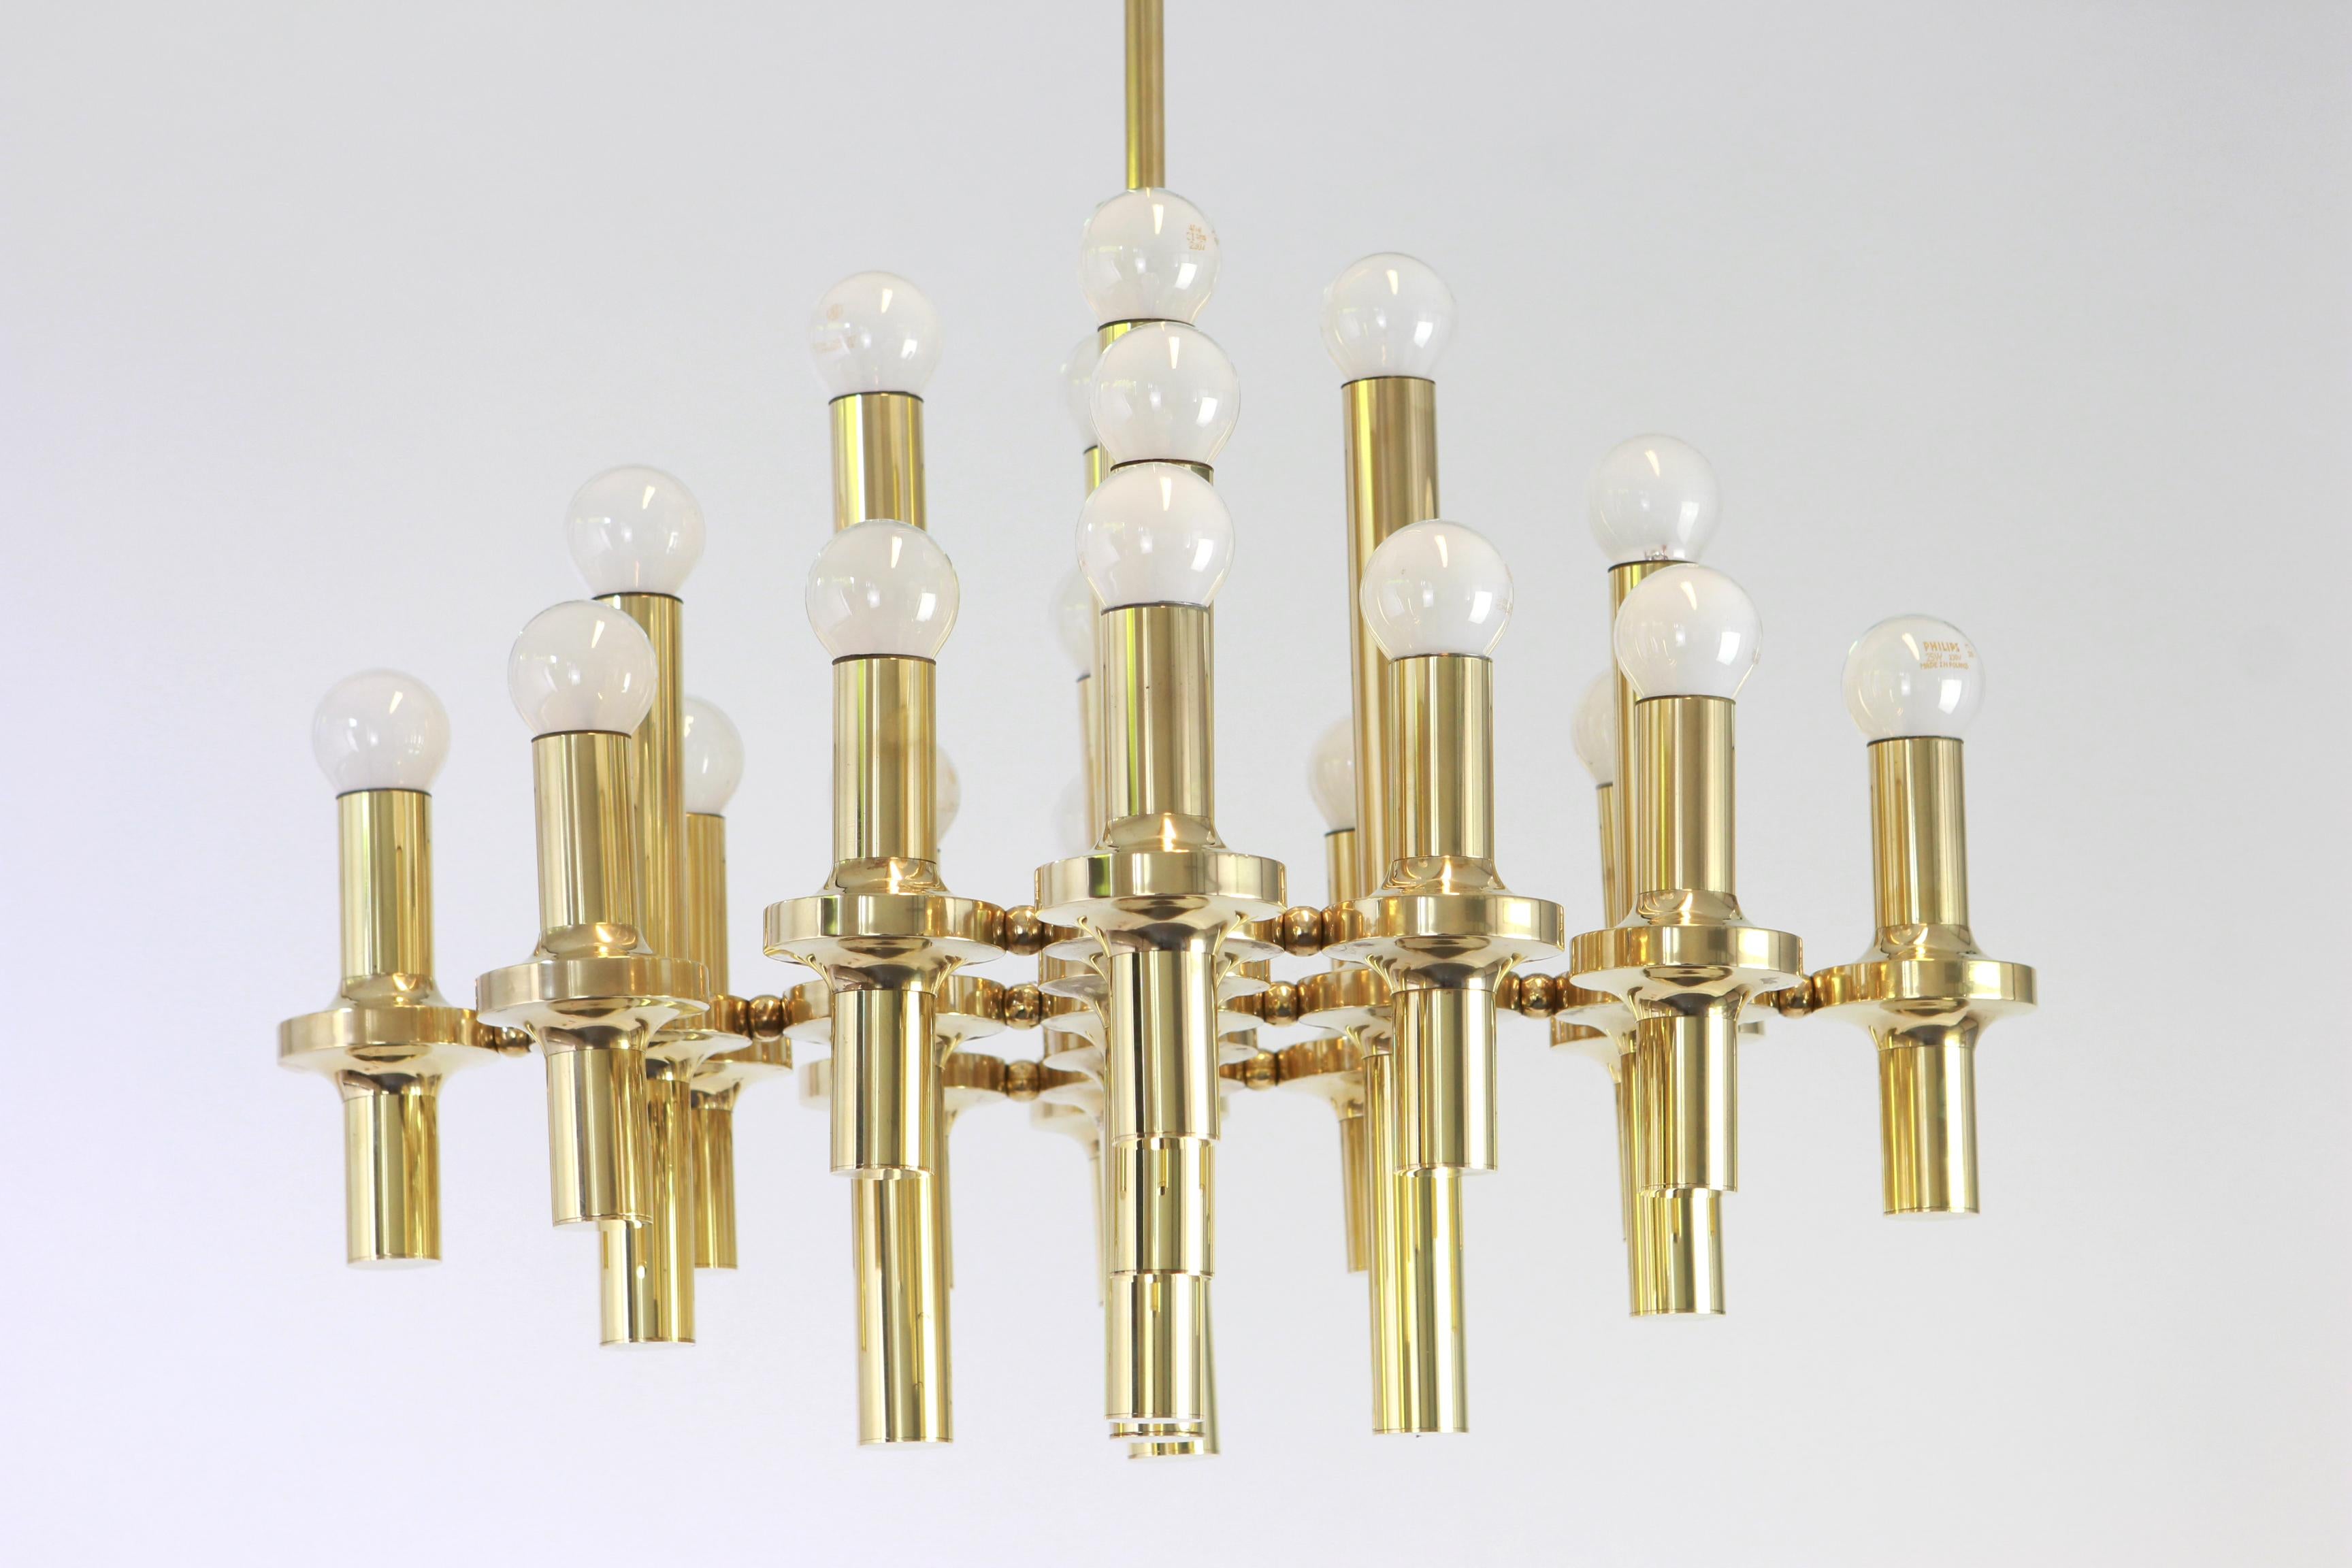 Wonderful midcentury brass chandelier in the manner of sciolari made by Staff Leuchten, manufactured in Germany, circa 1970s.

Sockets: 20 x E14 small bulbs./ max. 40 watt each-
Good condition.

H 70 cm - 27.24 inch //Drop rod can be adjusted